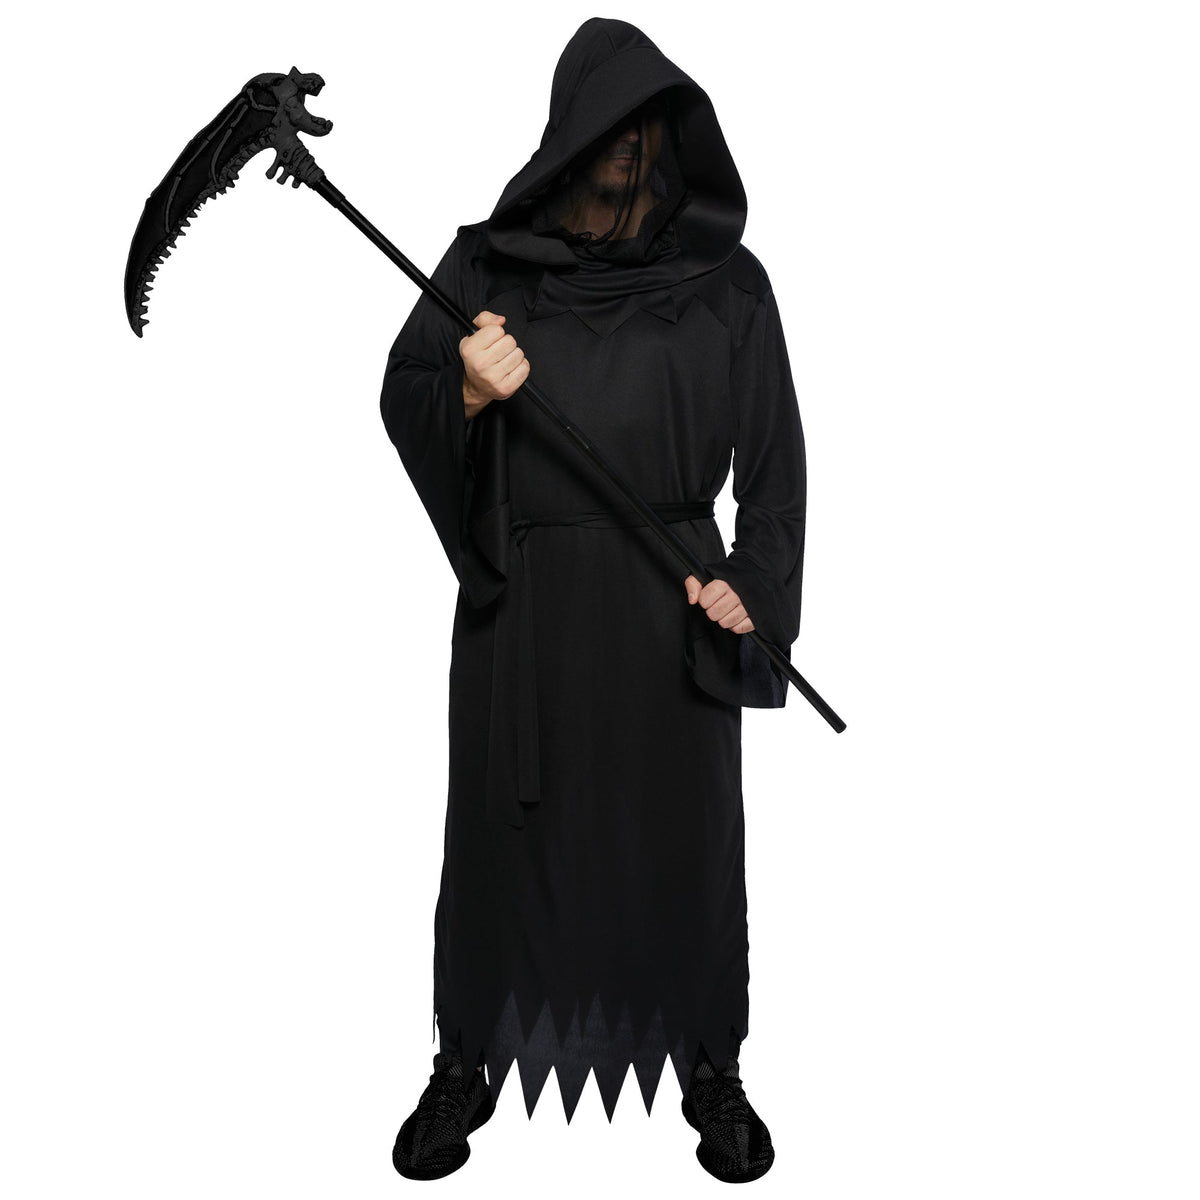 SHENZHEN PARTYGEARS DEVELOPMENT CO. LTD Costumes The Reaper Costume for Plus Size Adults, Black Robe with Mask and Belt 810077659380